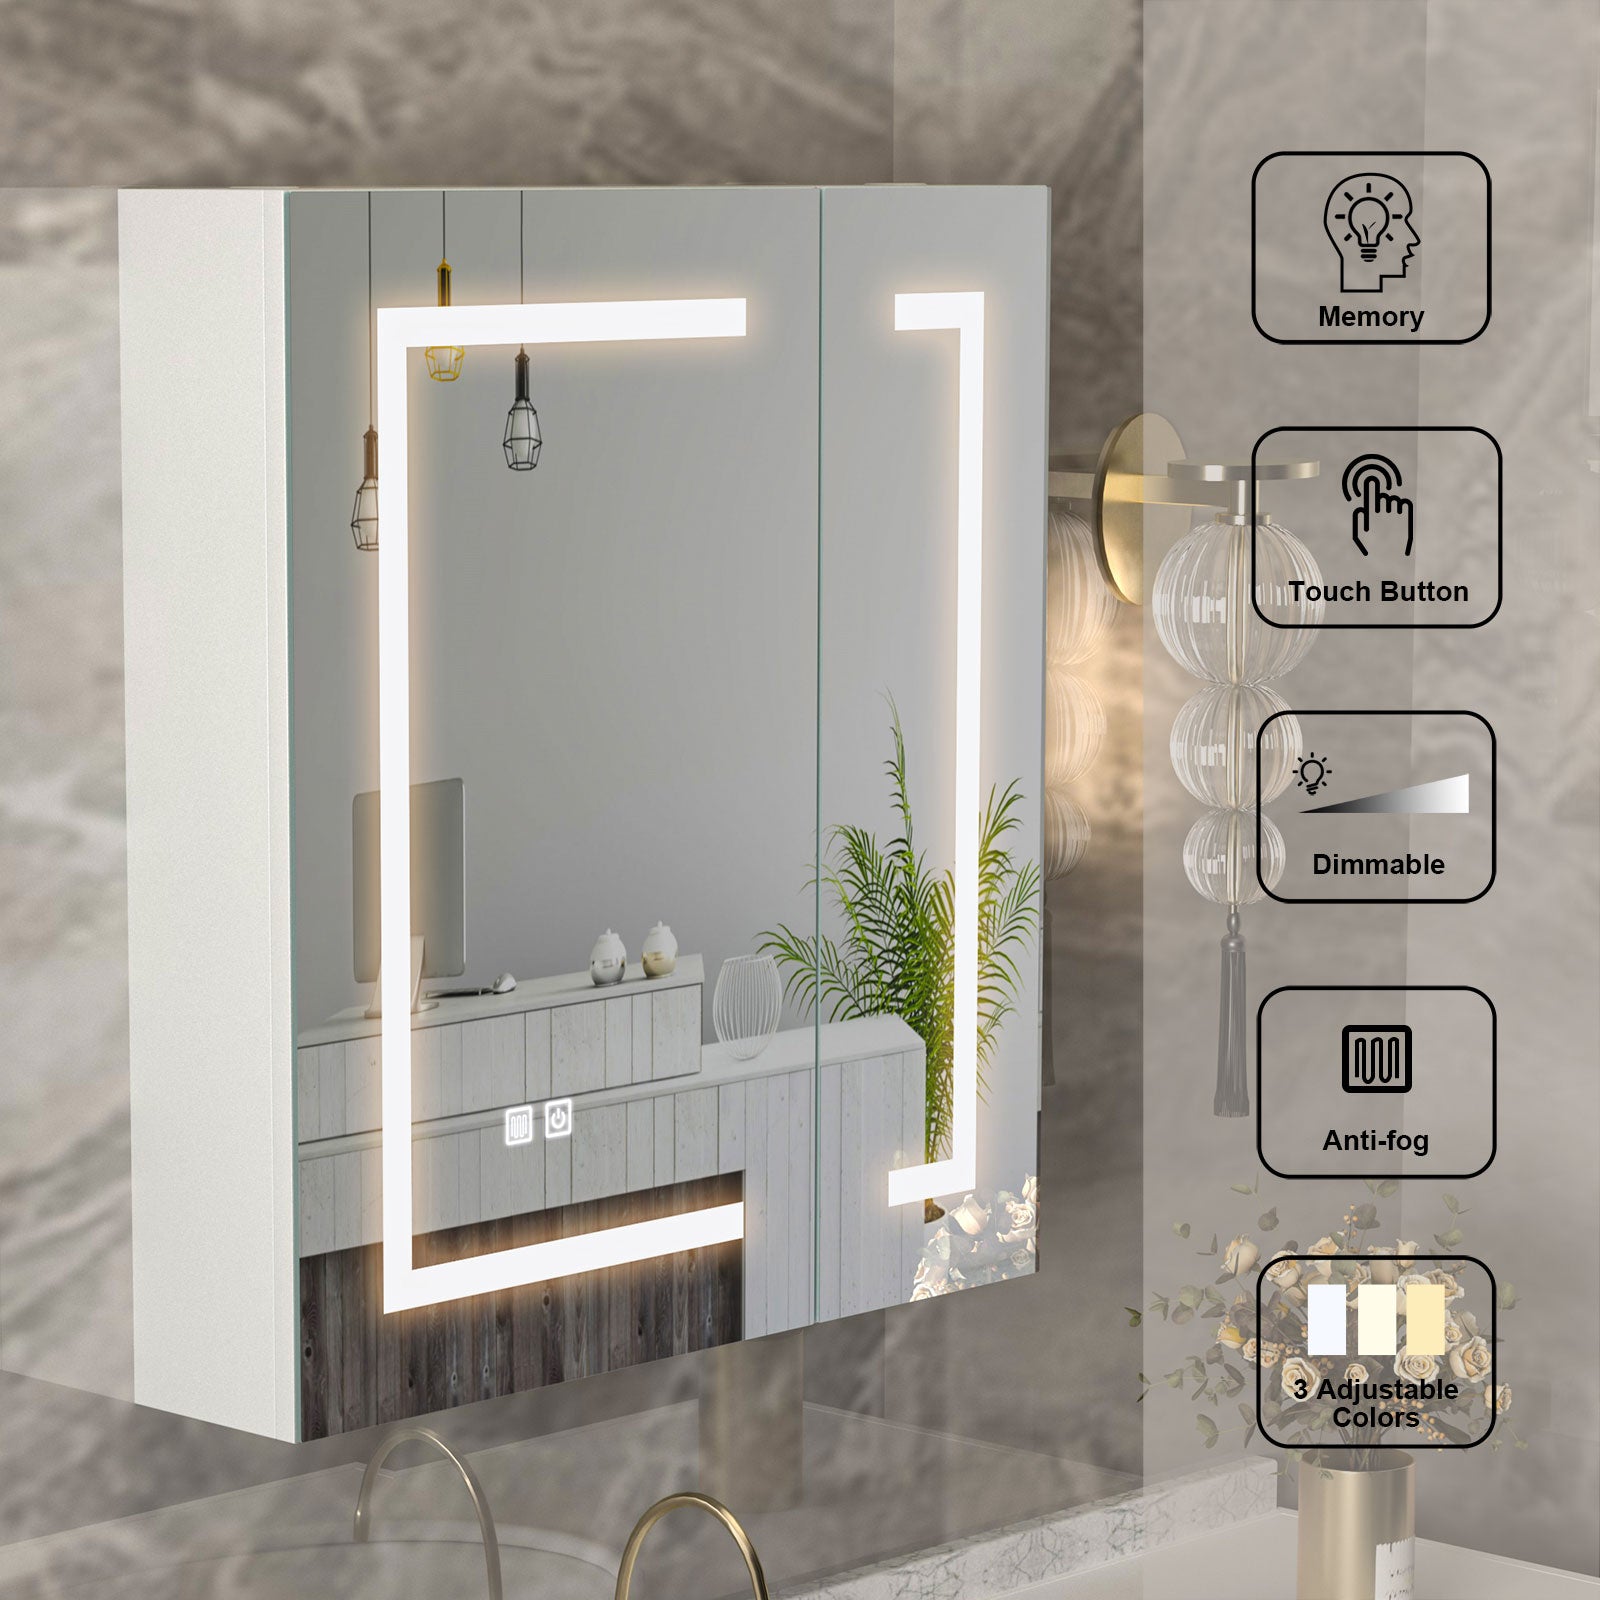 Bathroom LED Lighted Medicine Cabinet with Defogger, Wall Mounted